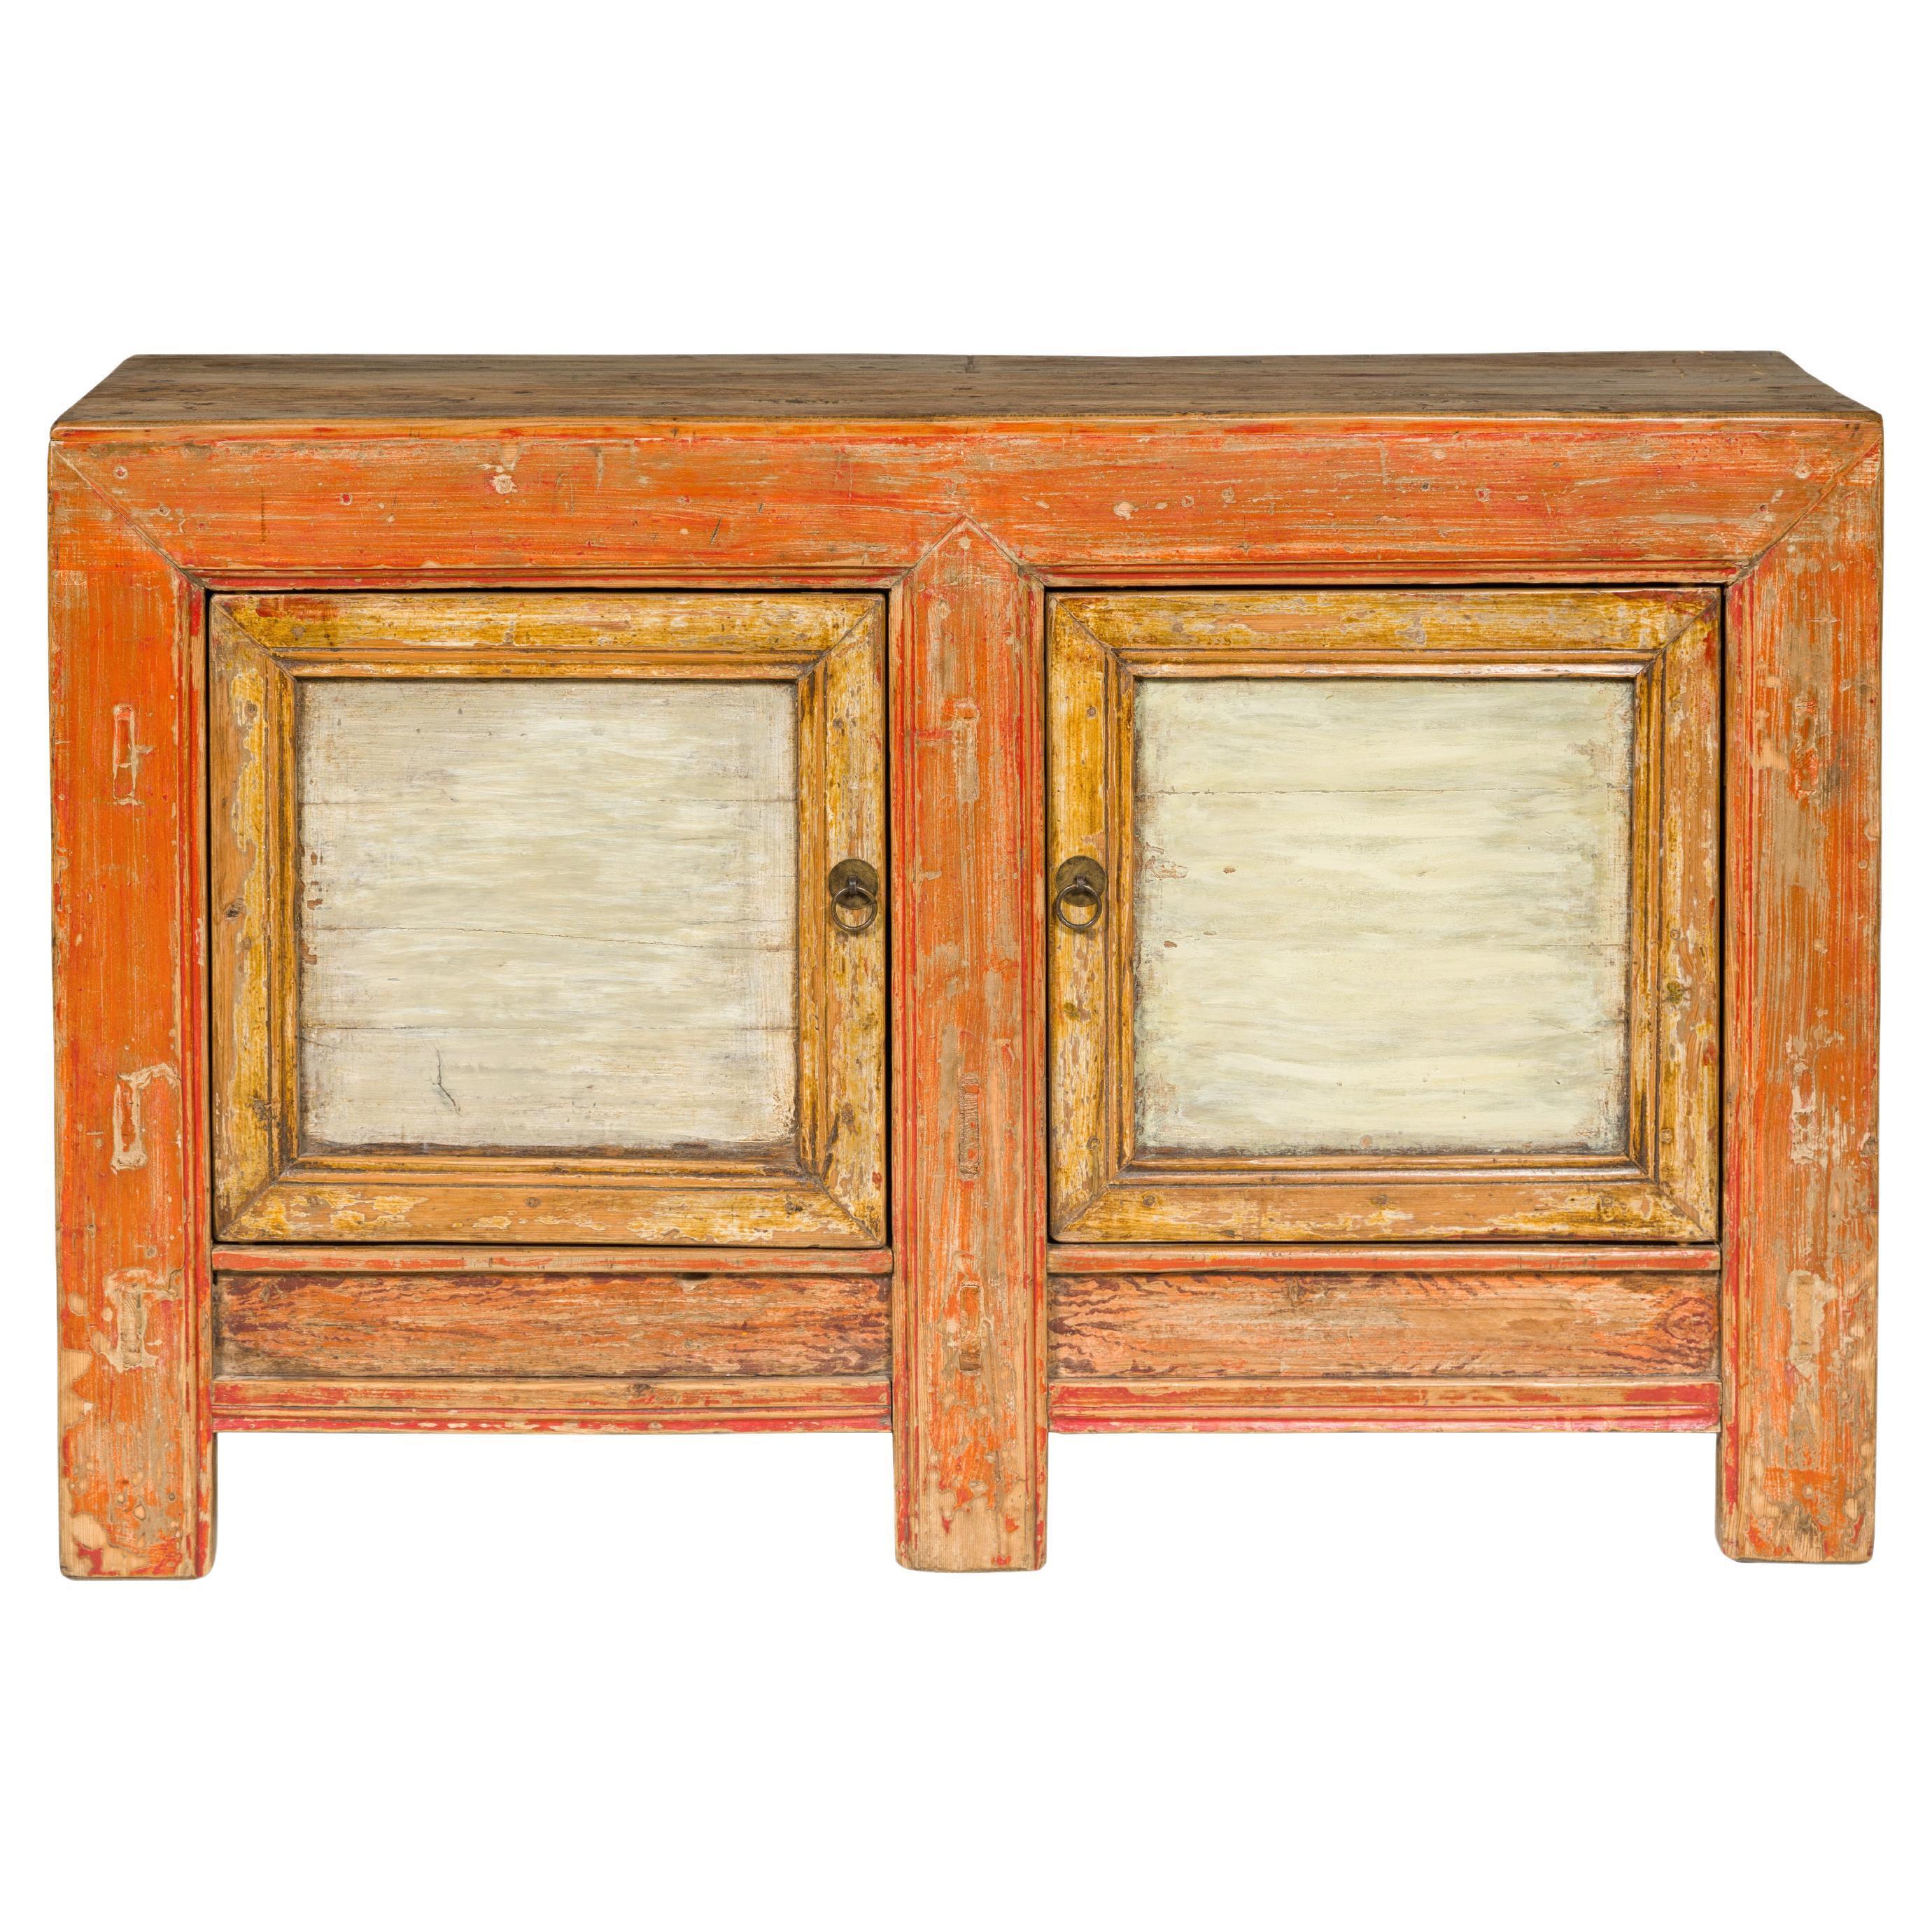 Country Style Painted Two-Door Buffet with Distressed Orange and Off-White Color For Sale